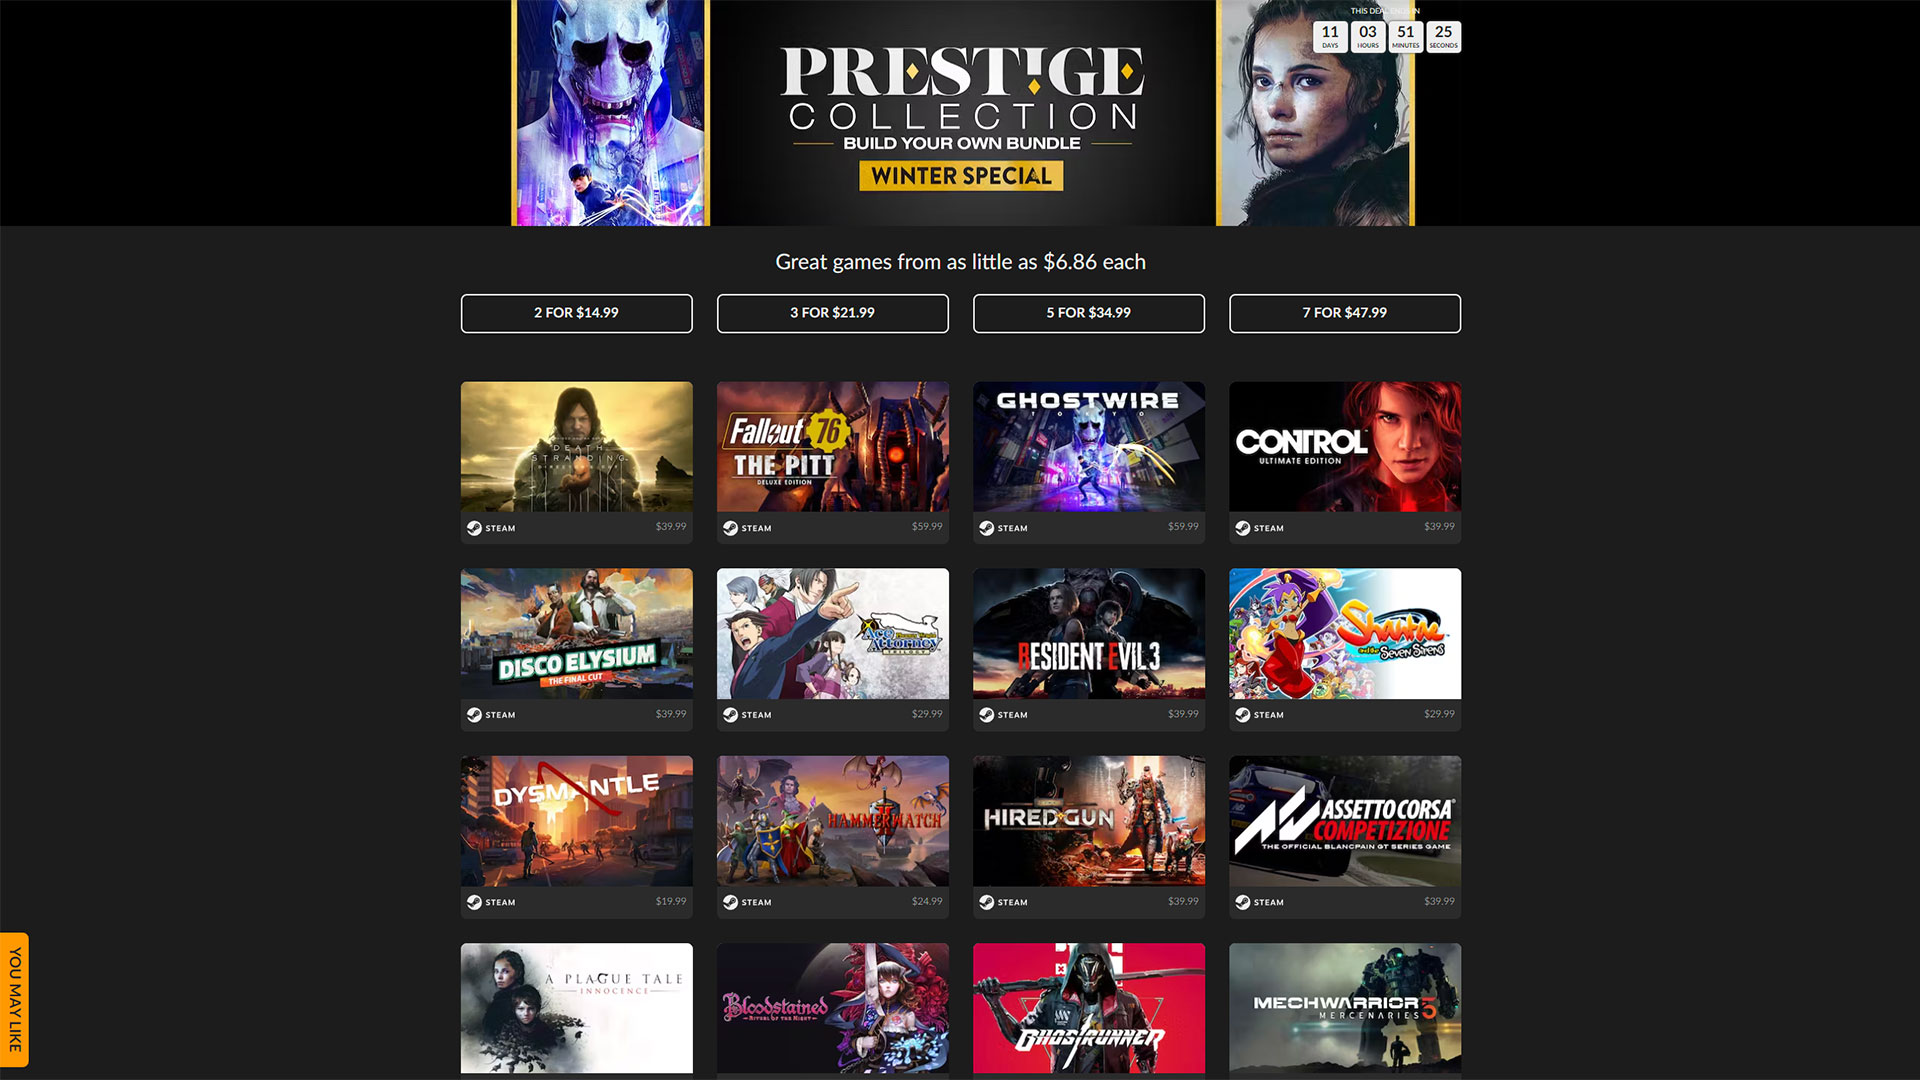 Fanatical's Prestige Collection Build Your Own Bundle Winter Special lets you choose seven games for $47.99